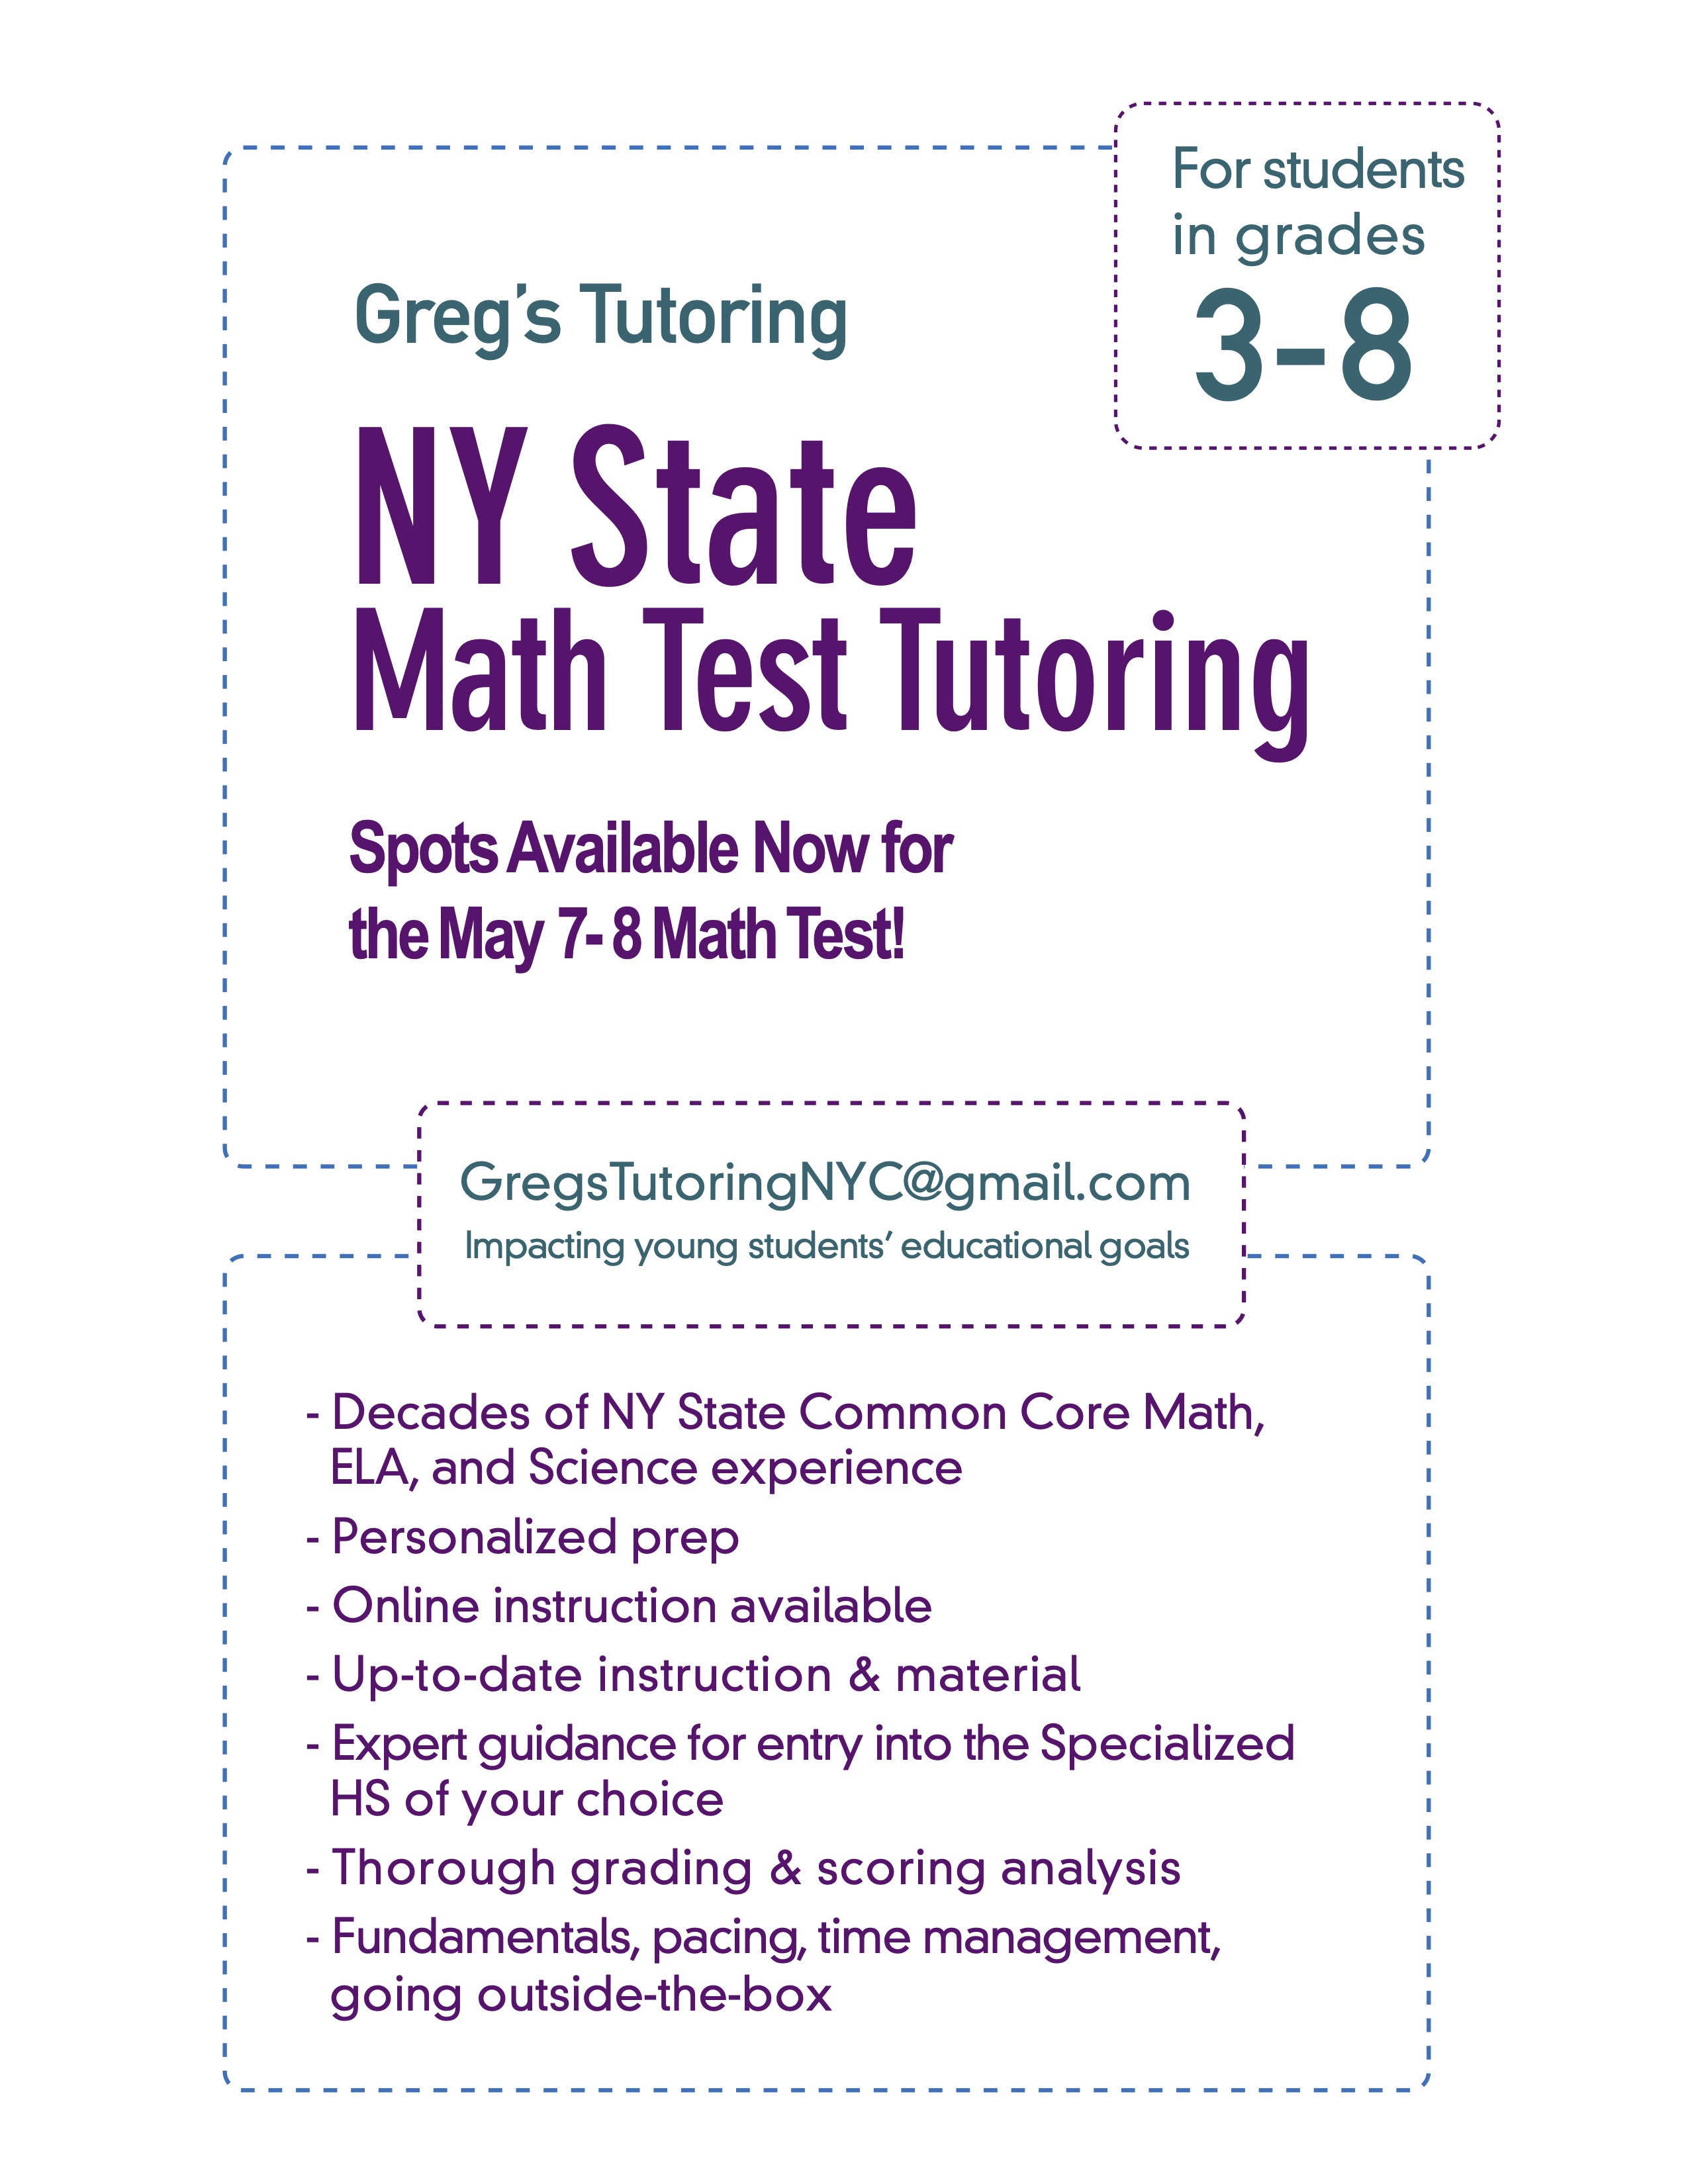 NYS State Math Test Tutoring Available Now